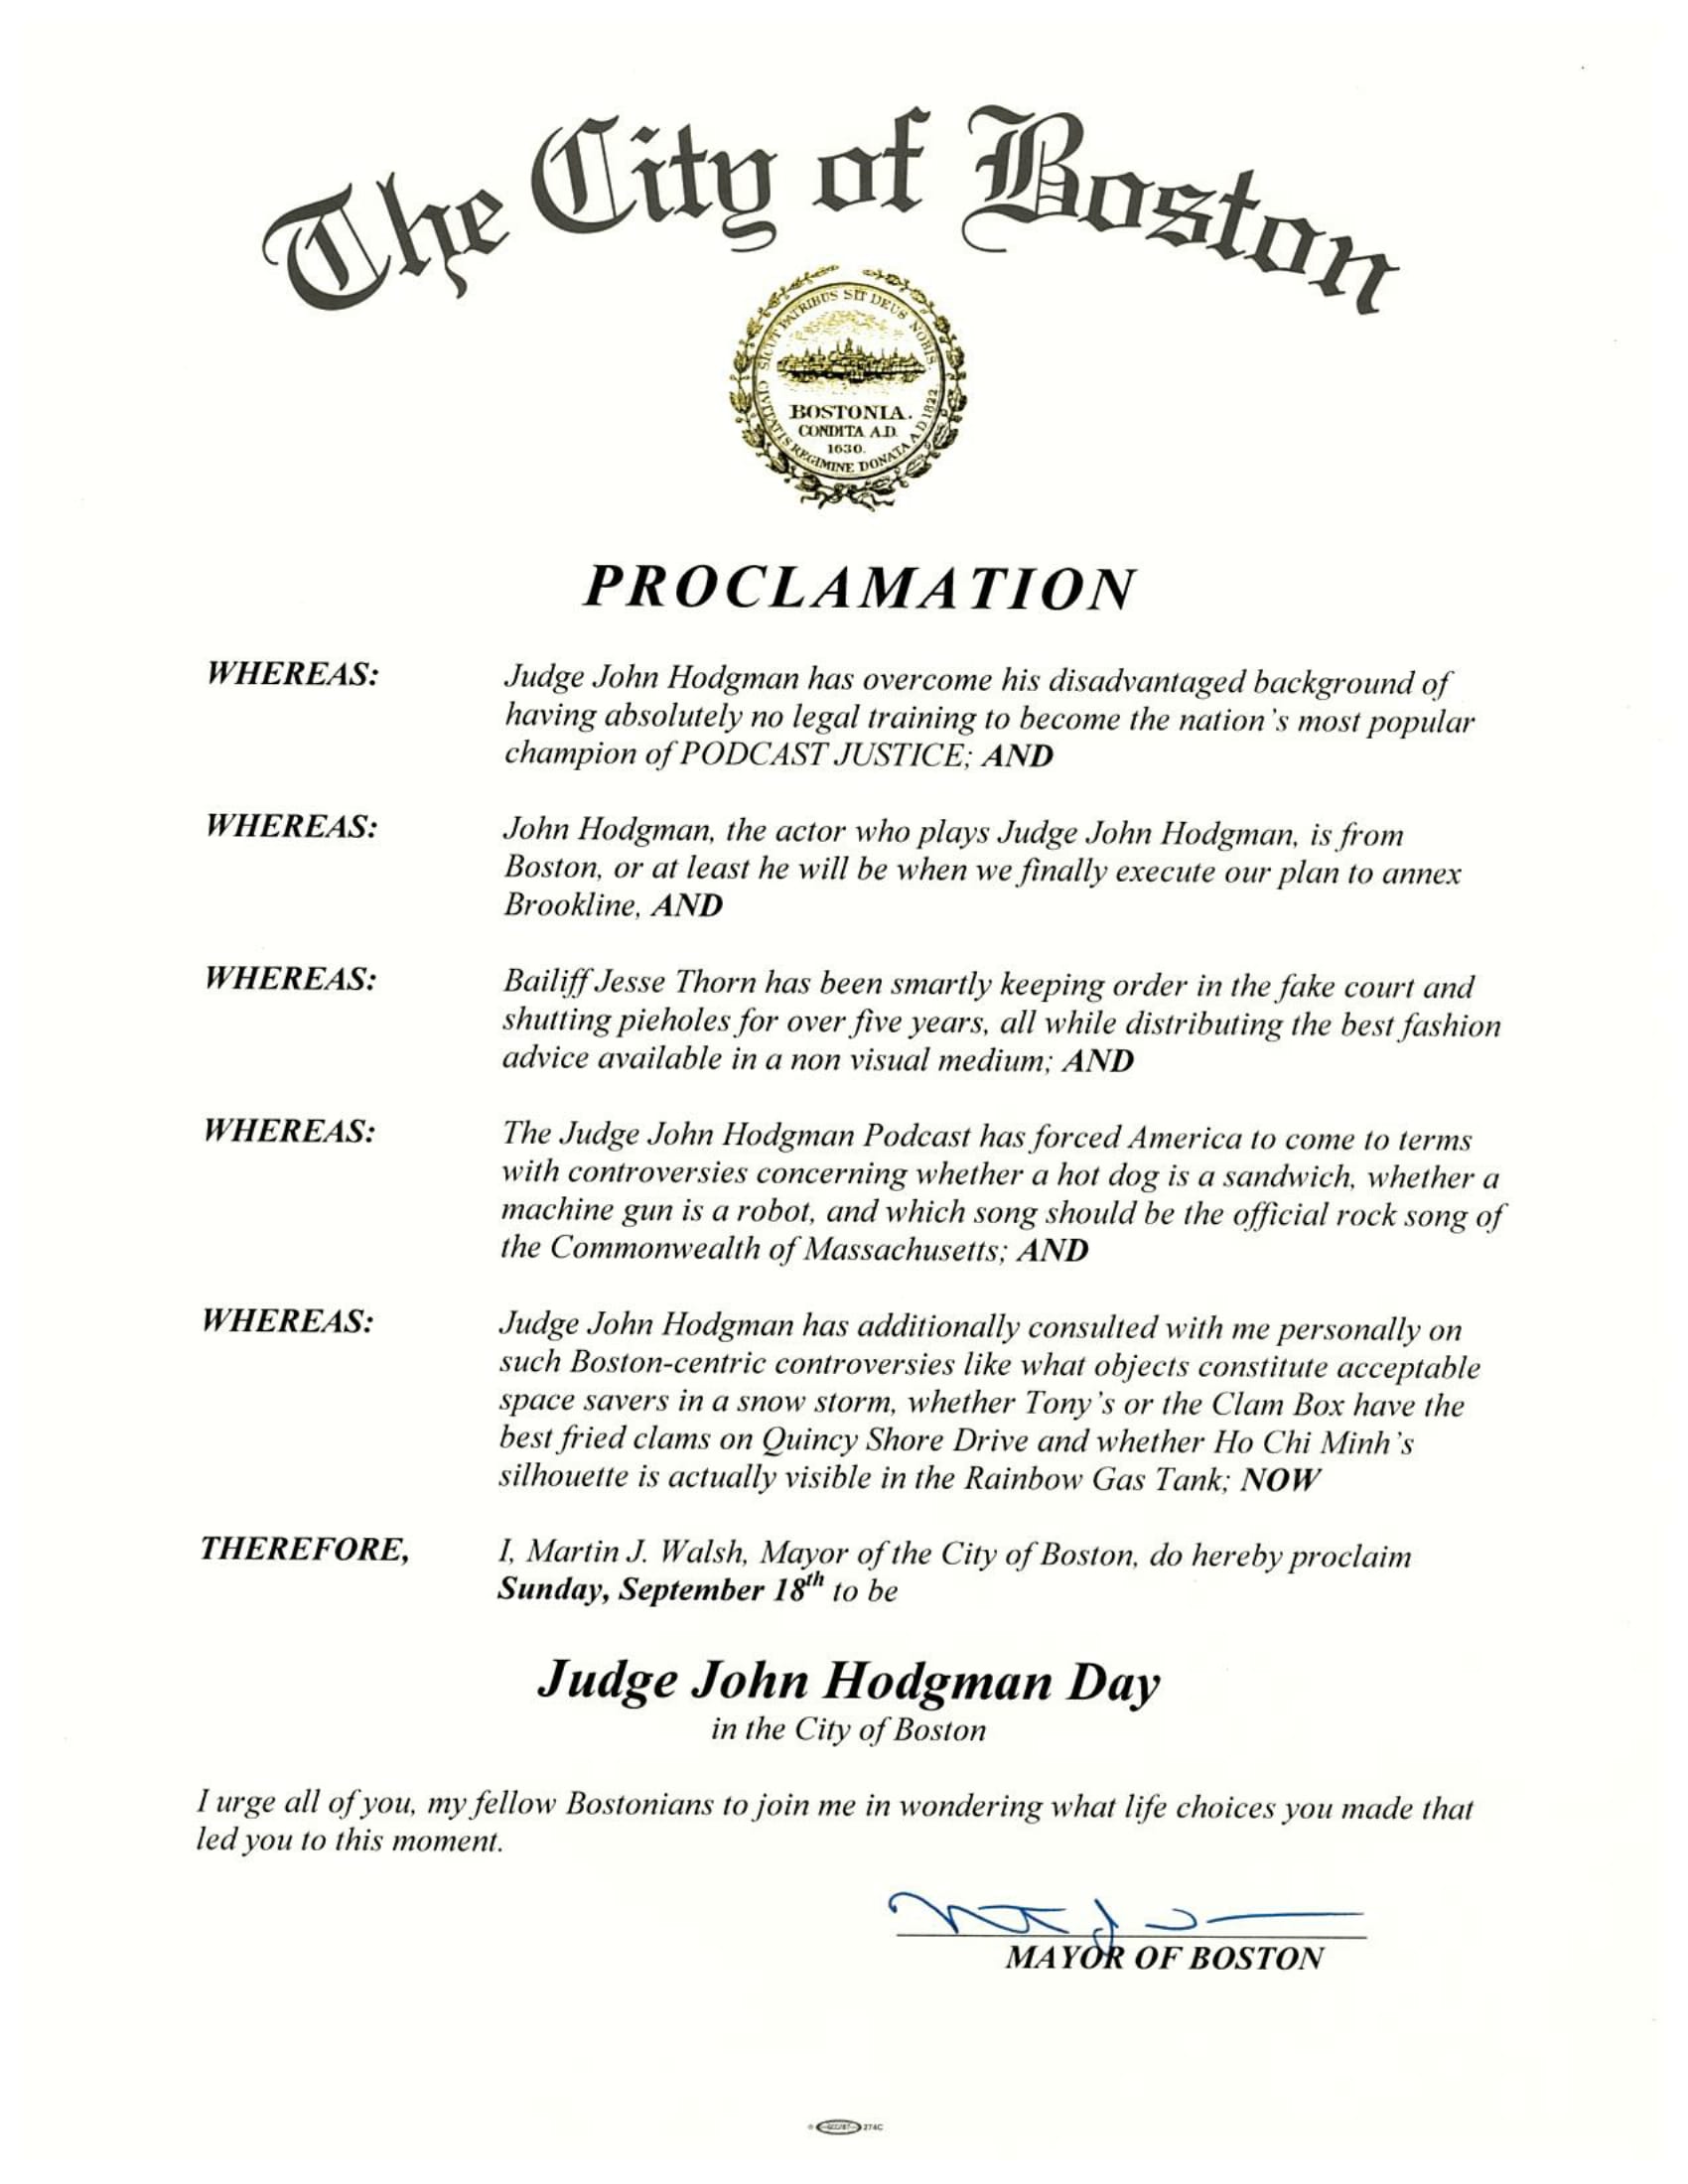 Mayor Walsh on Twitter: "I am declaring Sunday Judge John @hodgman day in the City of in honor of this champion of justice. https://t.co/GVpMG9sPSt" Twitter